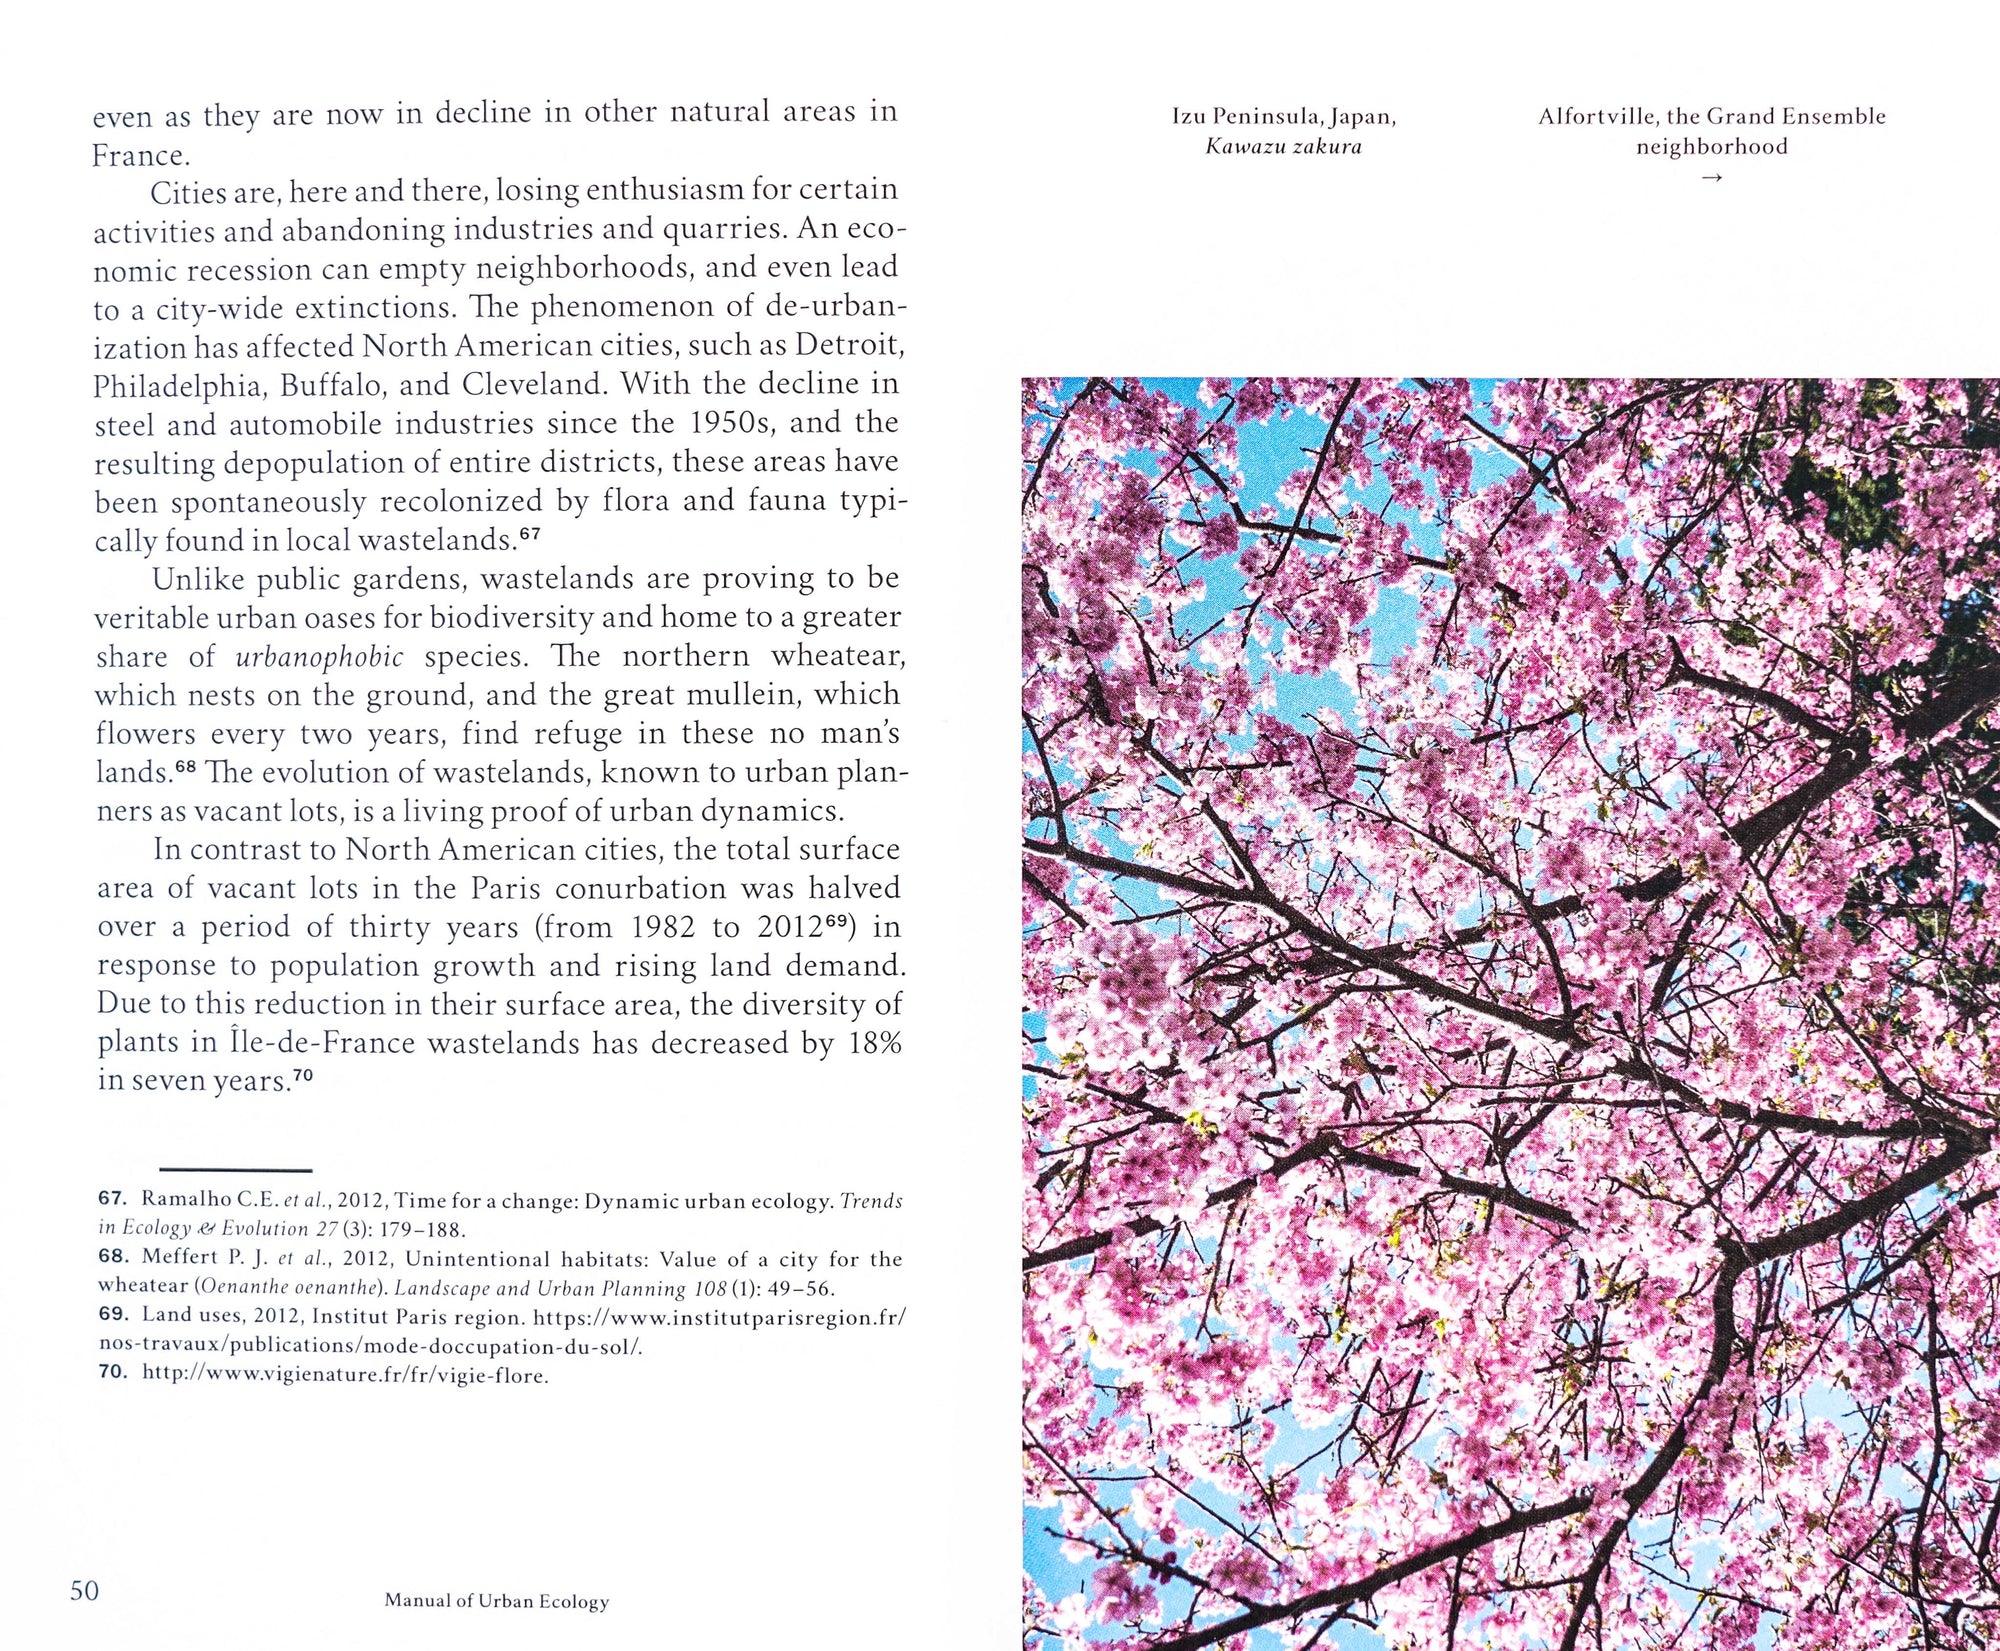 Spread of the pages 50 to 51 showing flow text and annotations at the bottom of the page on the left and a photo of a blossoming cherry tree on the right.